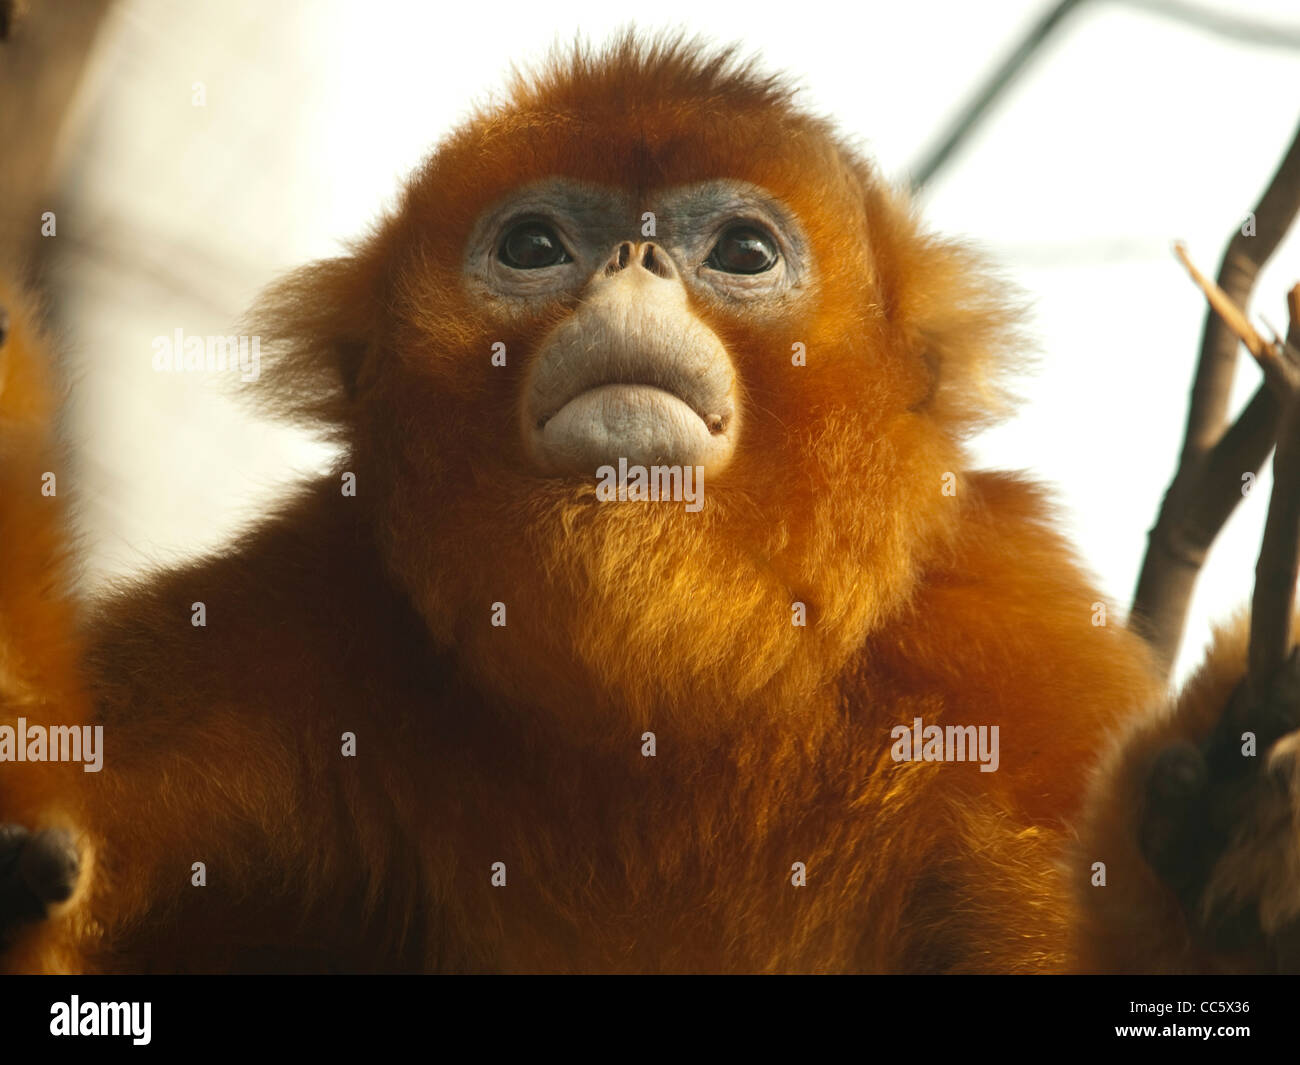 Golden Monkey cub, Animal sauvage Zoo, Shenzhen, Guangdong, Chine Banque D'Images